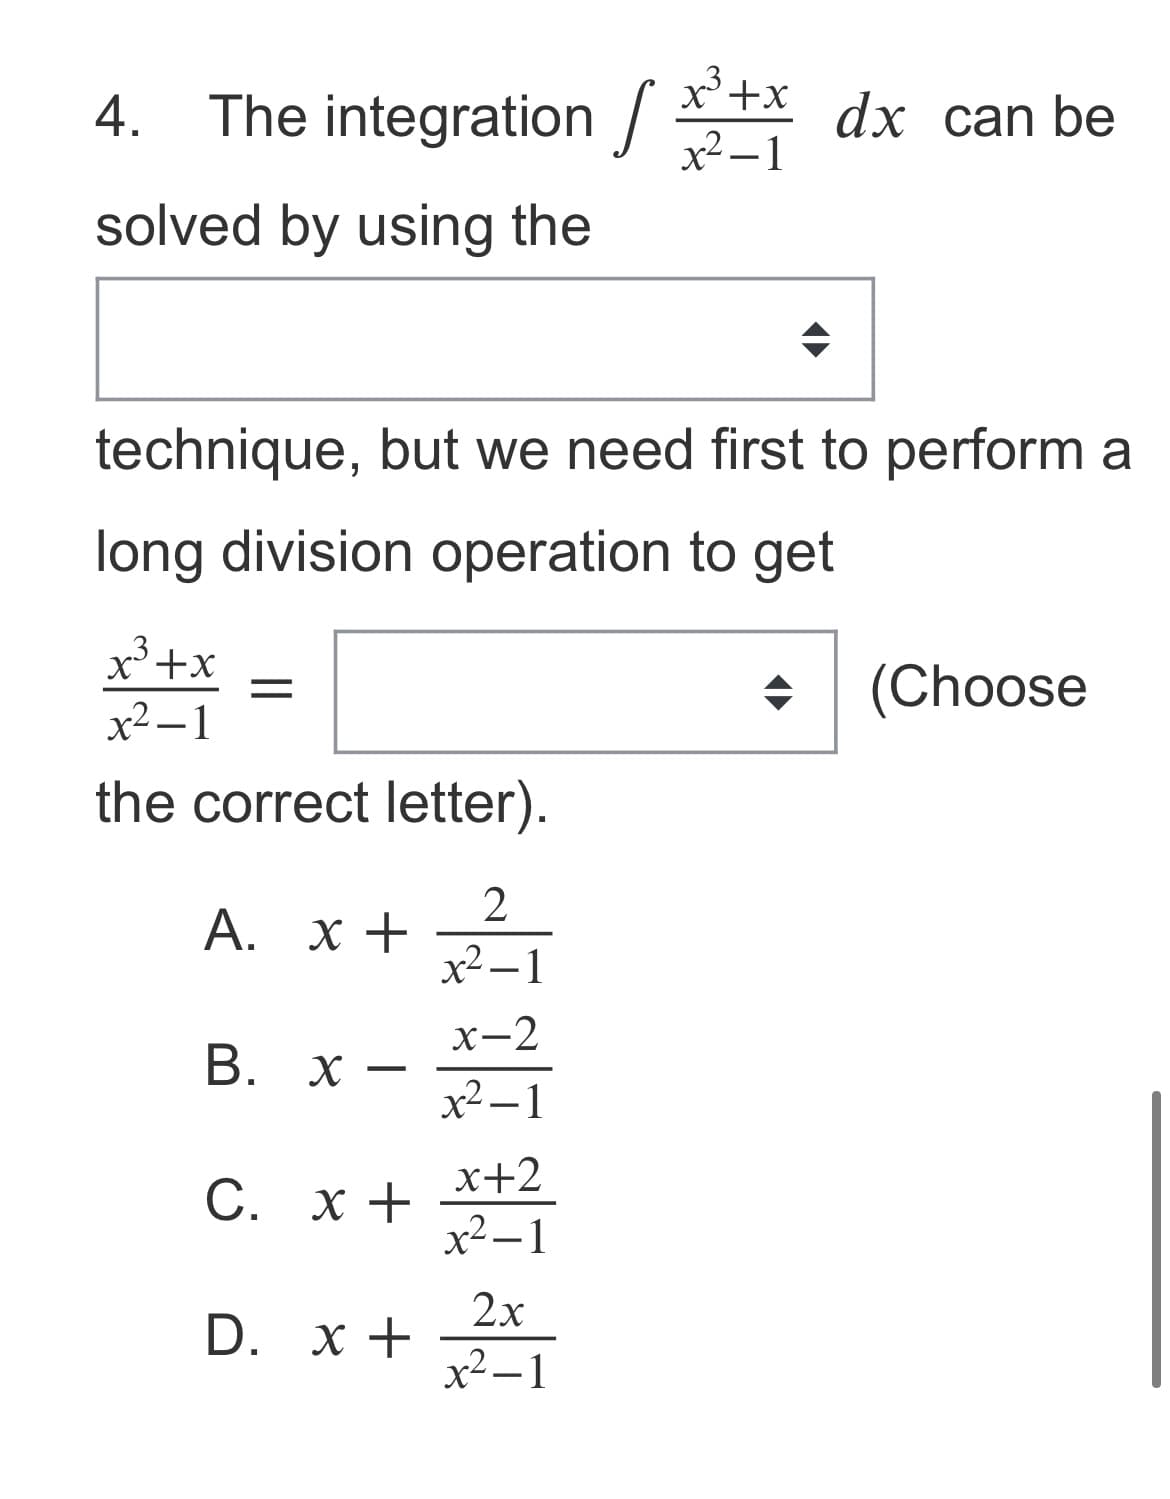 4. The integration +x dx can be
x² –1
solved by using the
technique, but we need first to perform a
long division operation to get
x'+x
(Choose
x² – 1
the correct letter).
2
x +
x² – 1
х-2
B.
X -
x² – 1
x+2
С. х +
x² – 1
2х
D. х +
x² – 1
